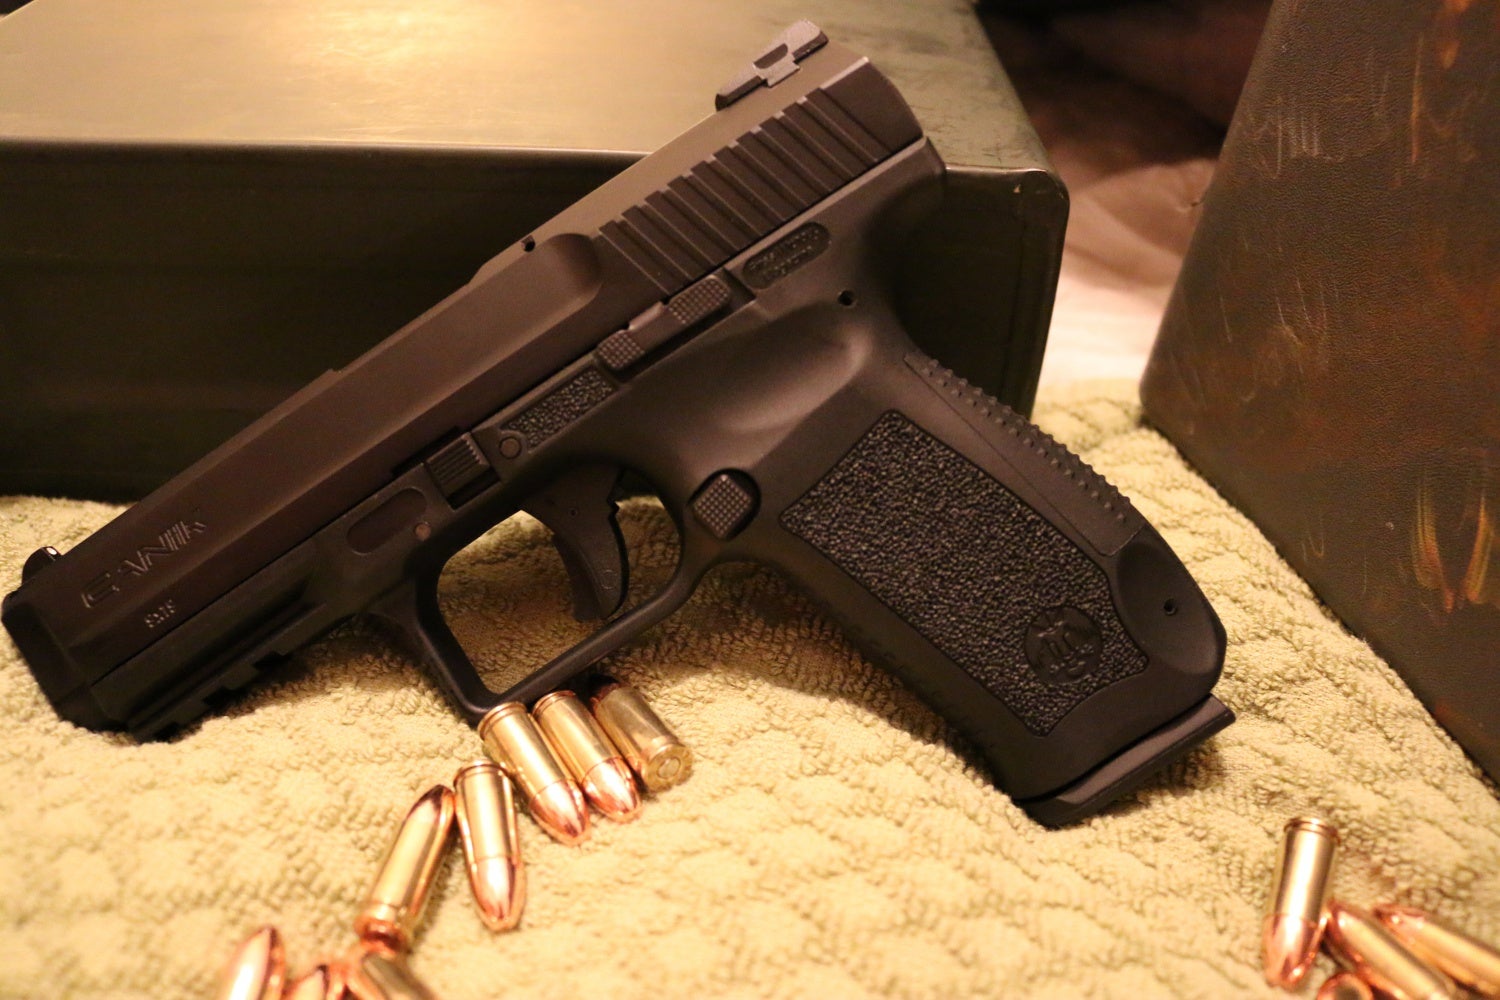 Review: Canik TP9 SF Black - Out "Glocking" a Glock.